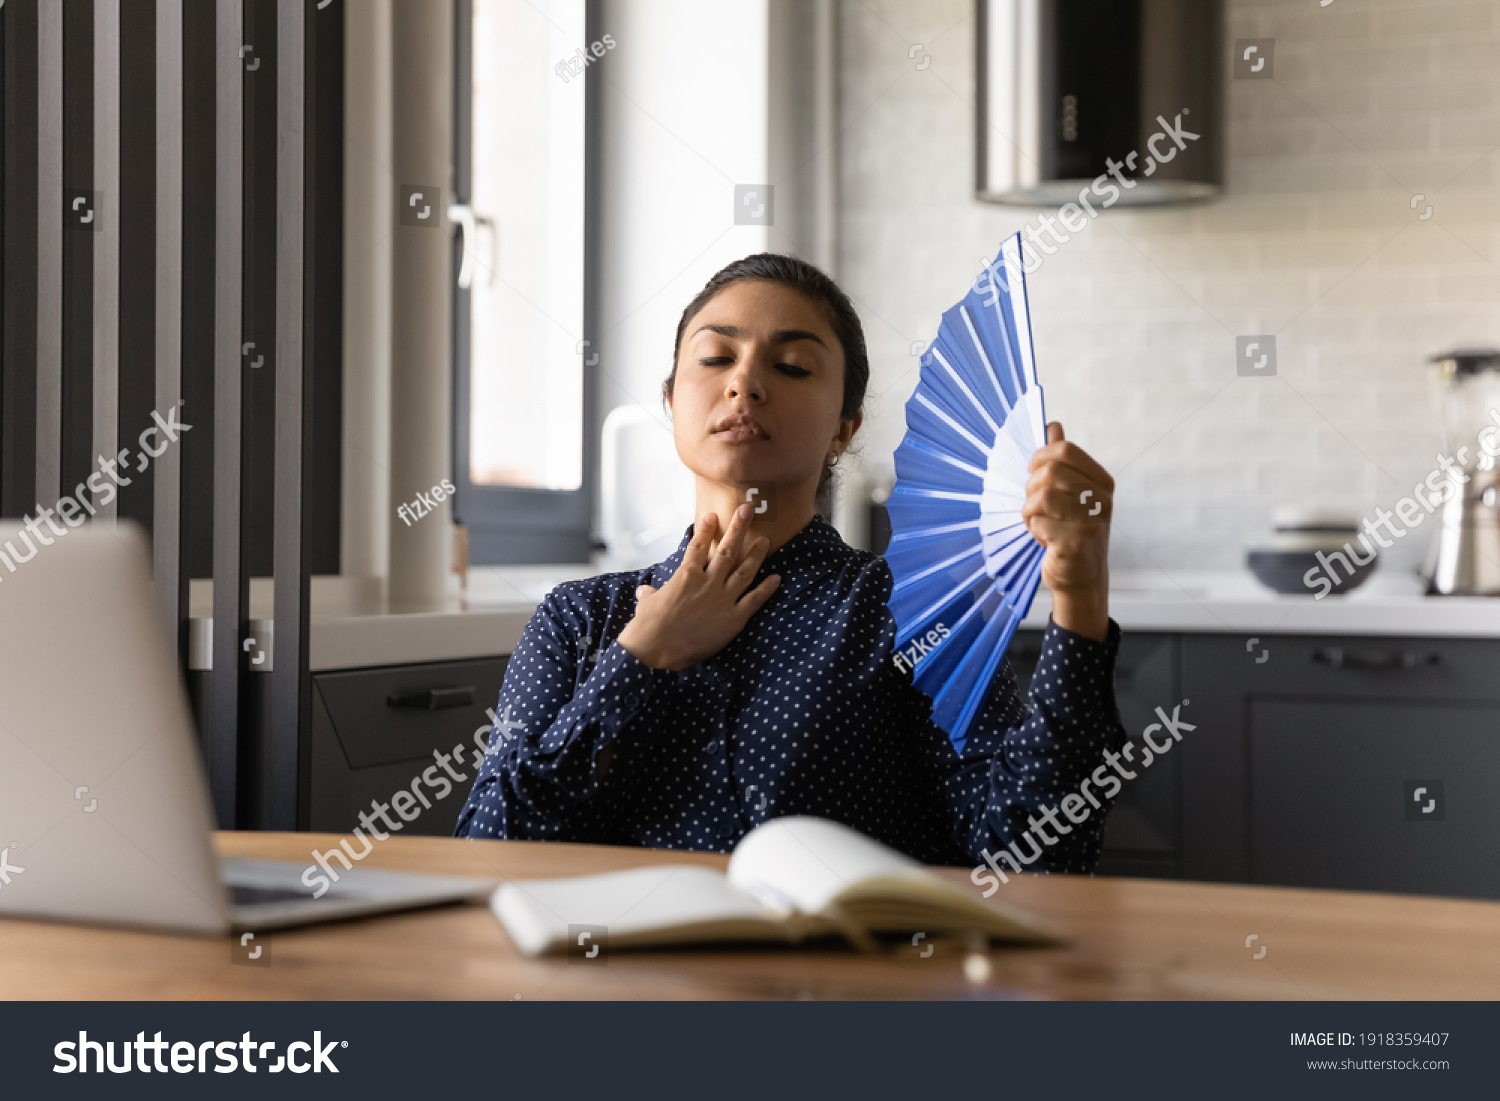 Unwell millennial Indian woman work on laptop at home office wave with hand fan feel overheated. Unhealthy tired young ethnic female use waver, suffer from hot weather or lack of AC indoors. #1918359407